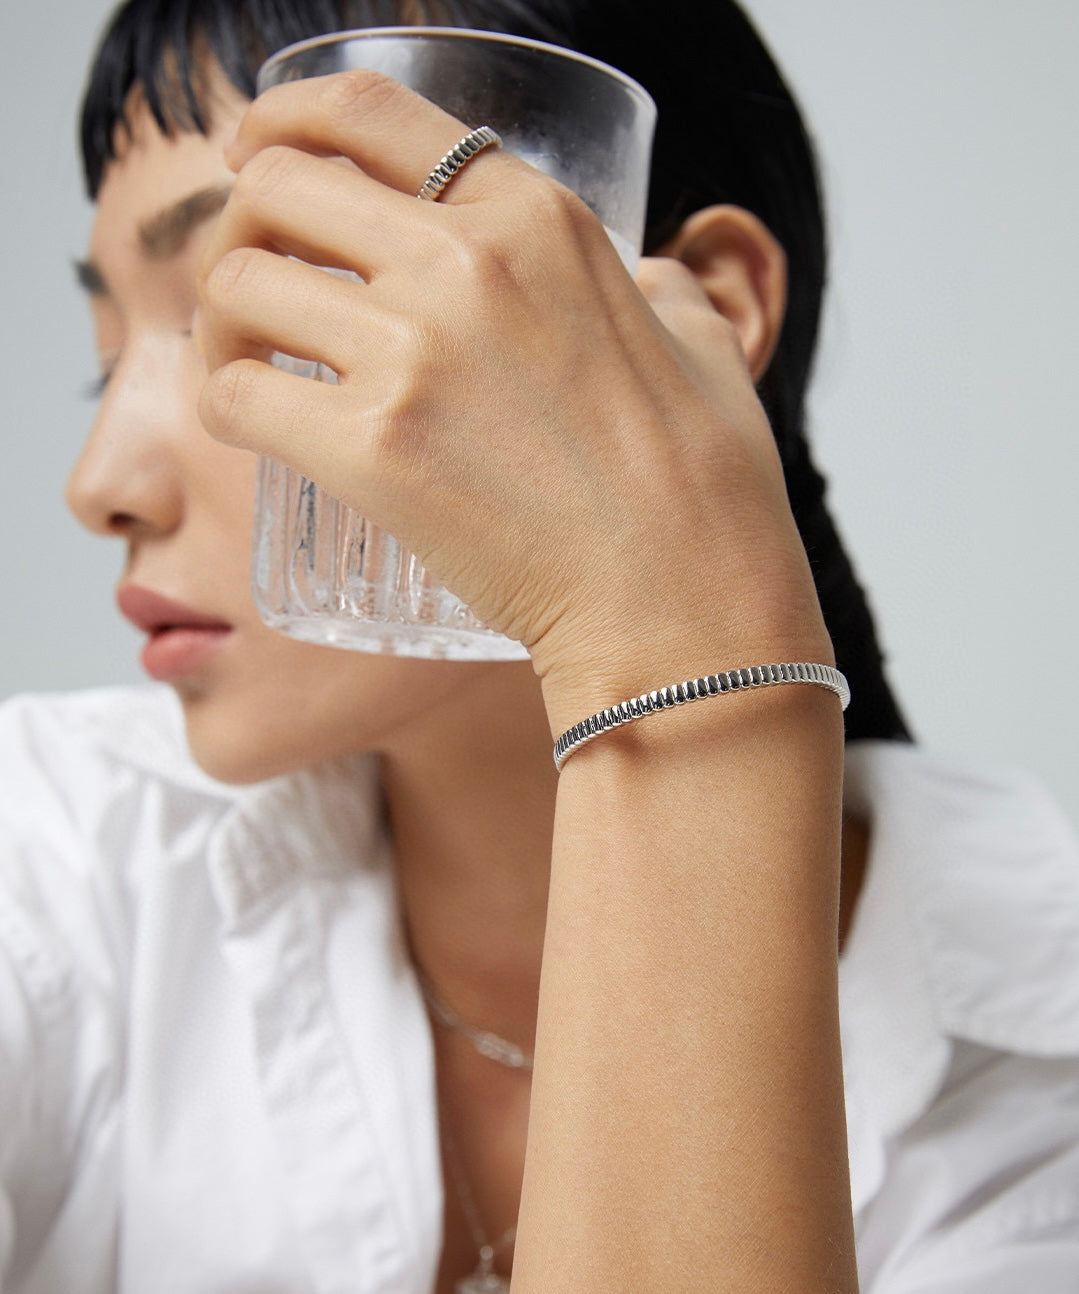 A Parisian woman is adorned with a statement accessory, the Parisian Gridline Bangle, as she holds a glass.